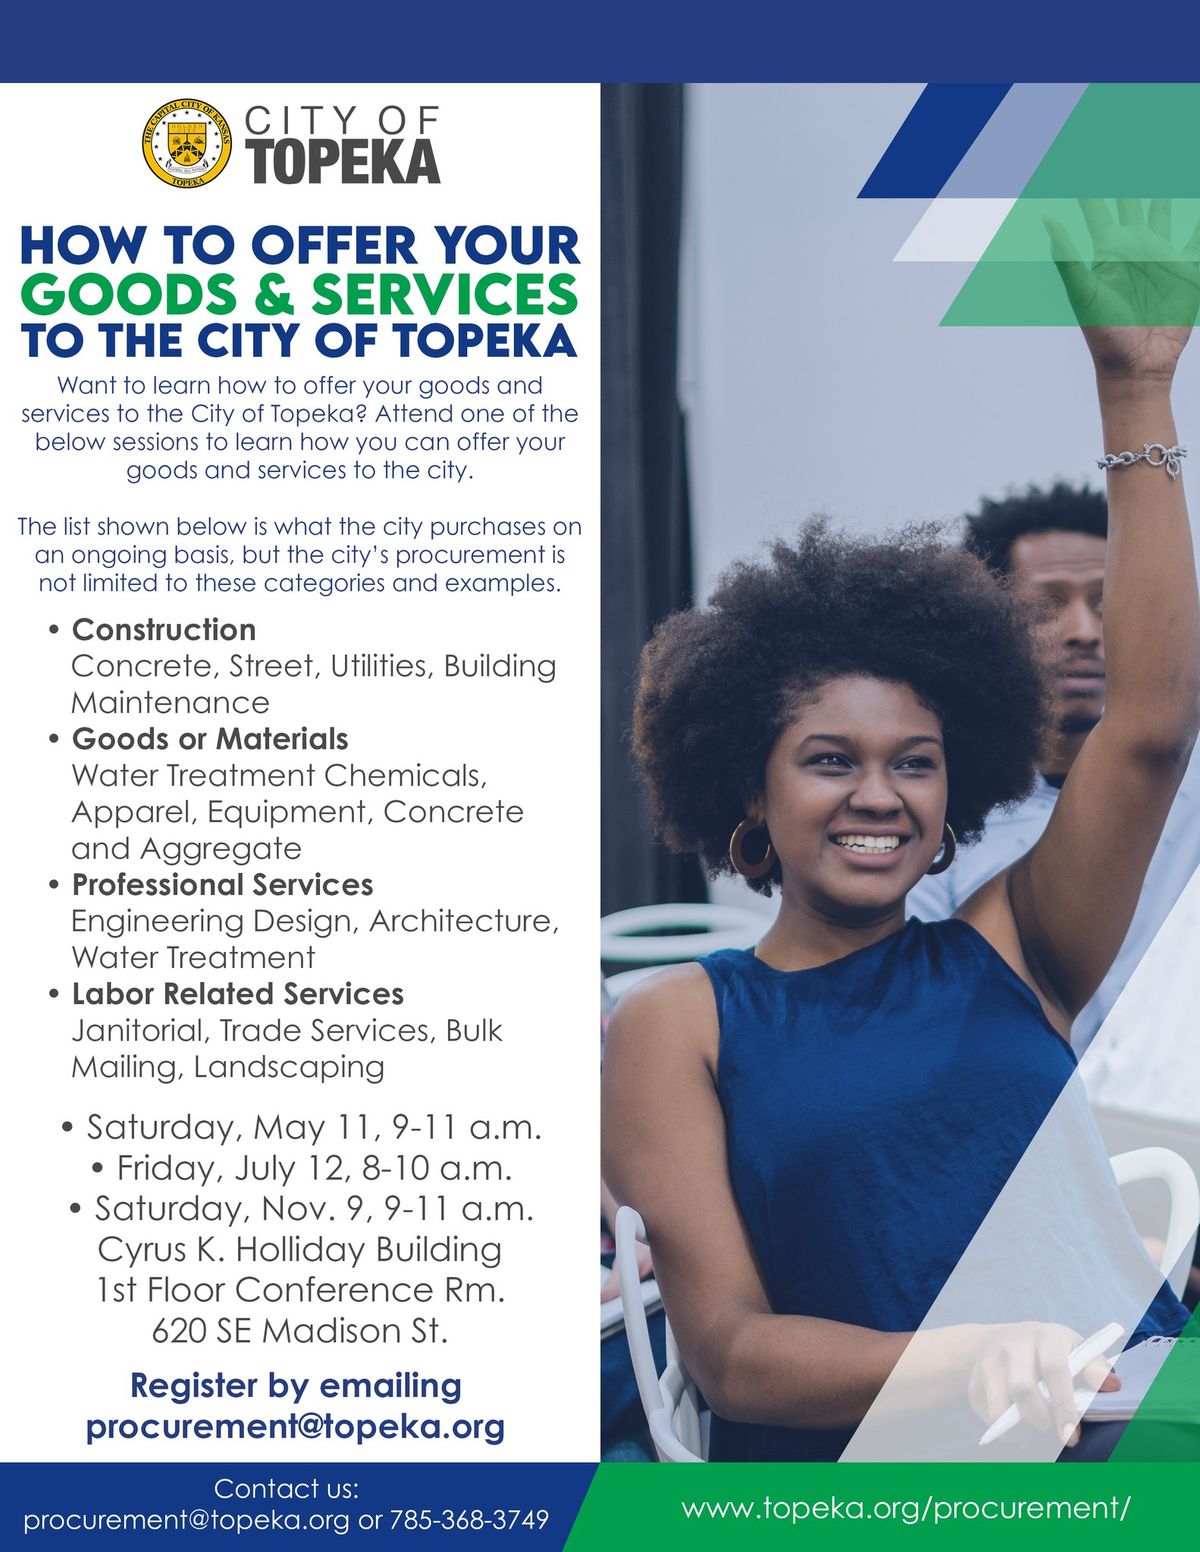 How to Offer Your Goods & Services to the City of Topeka 